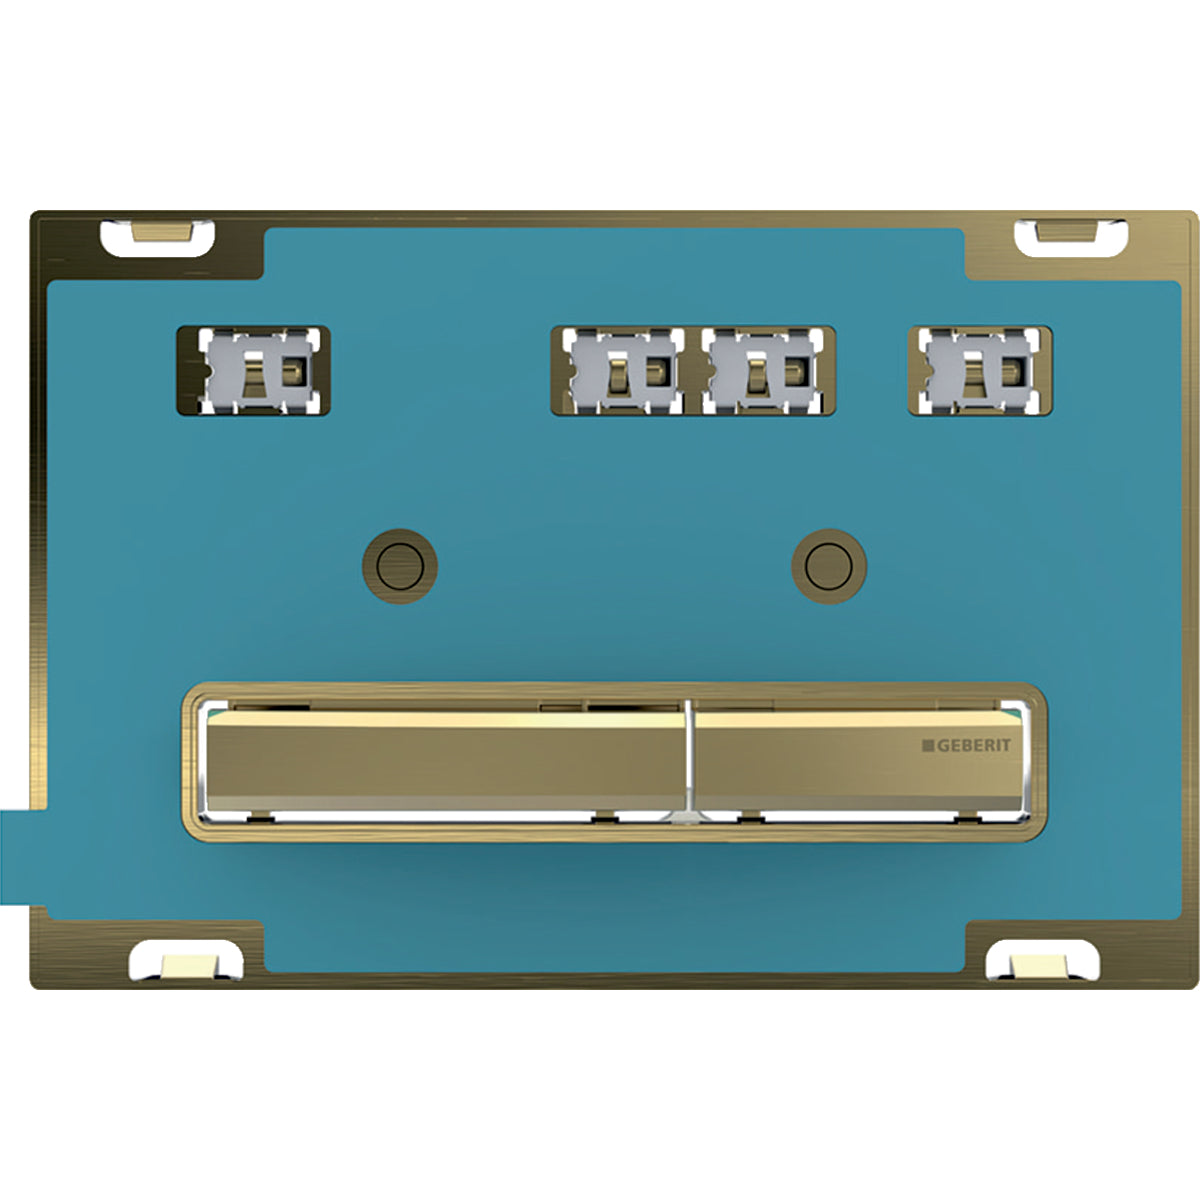 Geberit 115.672.00.2- Geberit actuator plate Sigma50 for dual flush, metal colour brass: brass, customised - FaucetExpress.ca